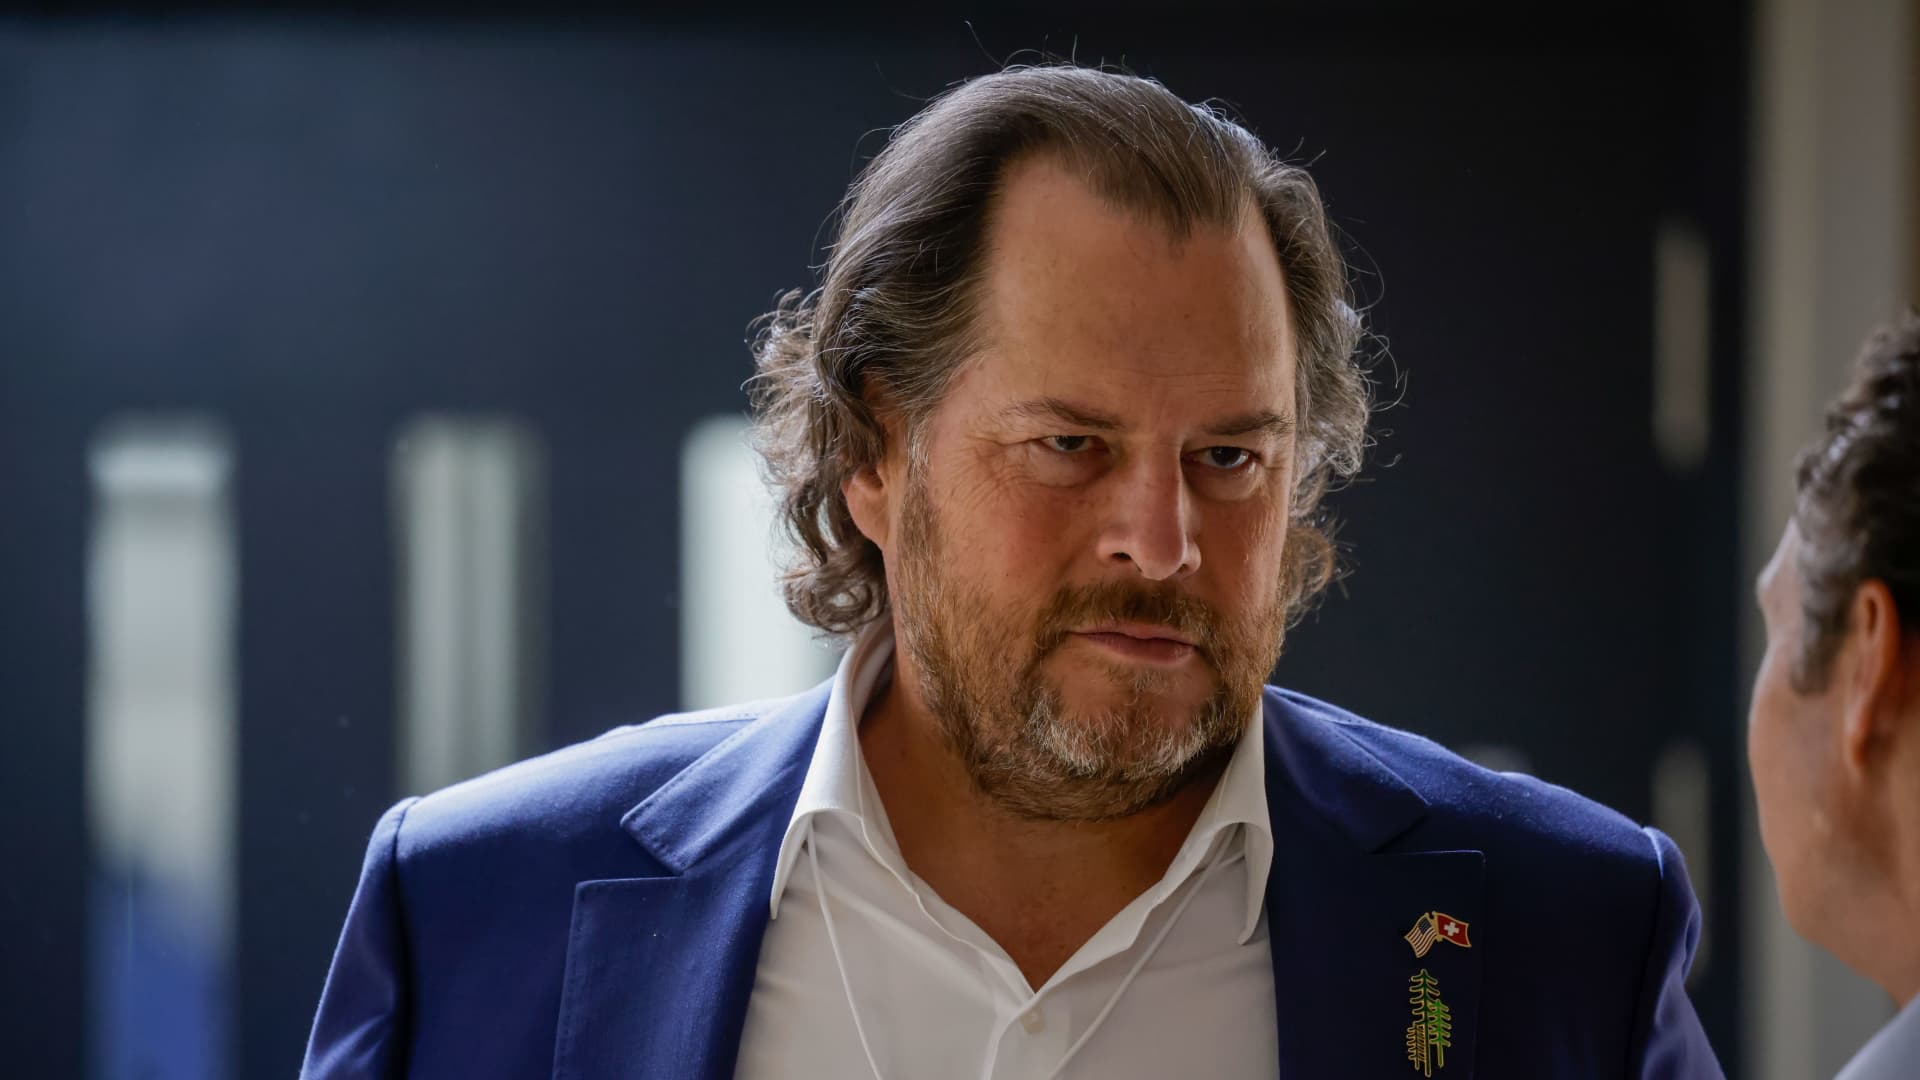 Salesforce co-CEO Marc Benioff hints at more potential layoffs after this week's job cuts